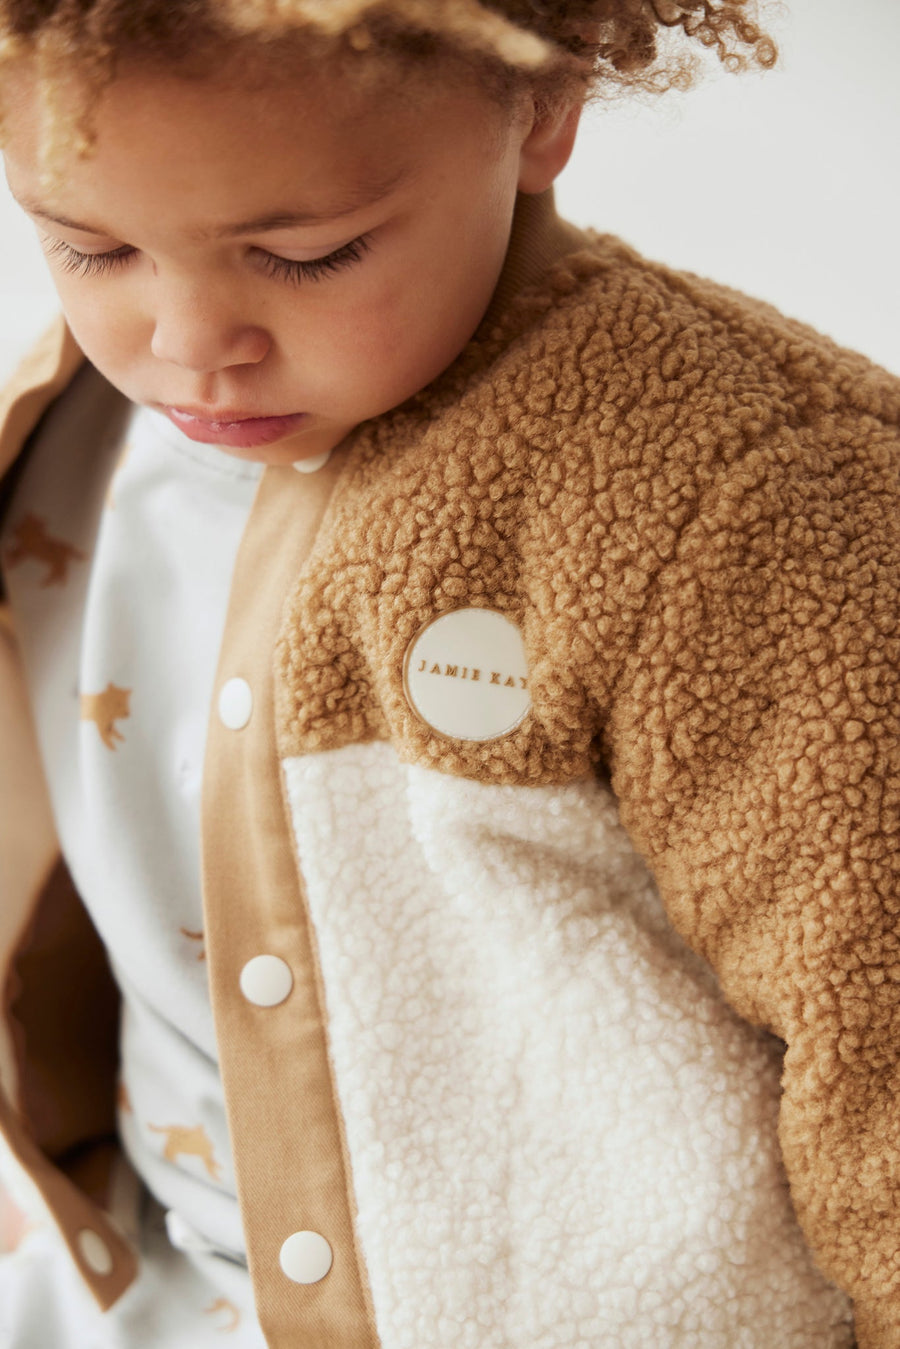 Perry Sherpa Jacket - Natural/Buckwheat Childrens Jacket from Jamie Kay USA